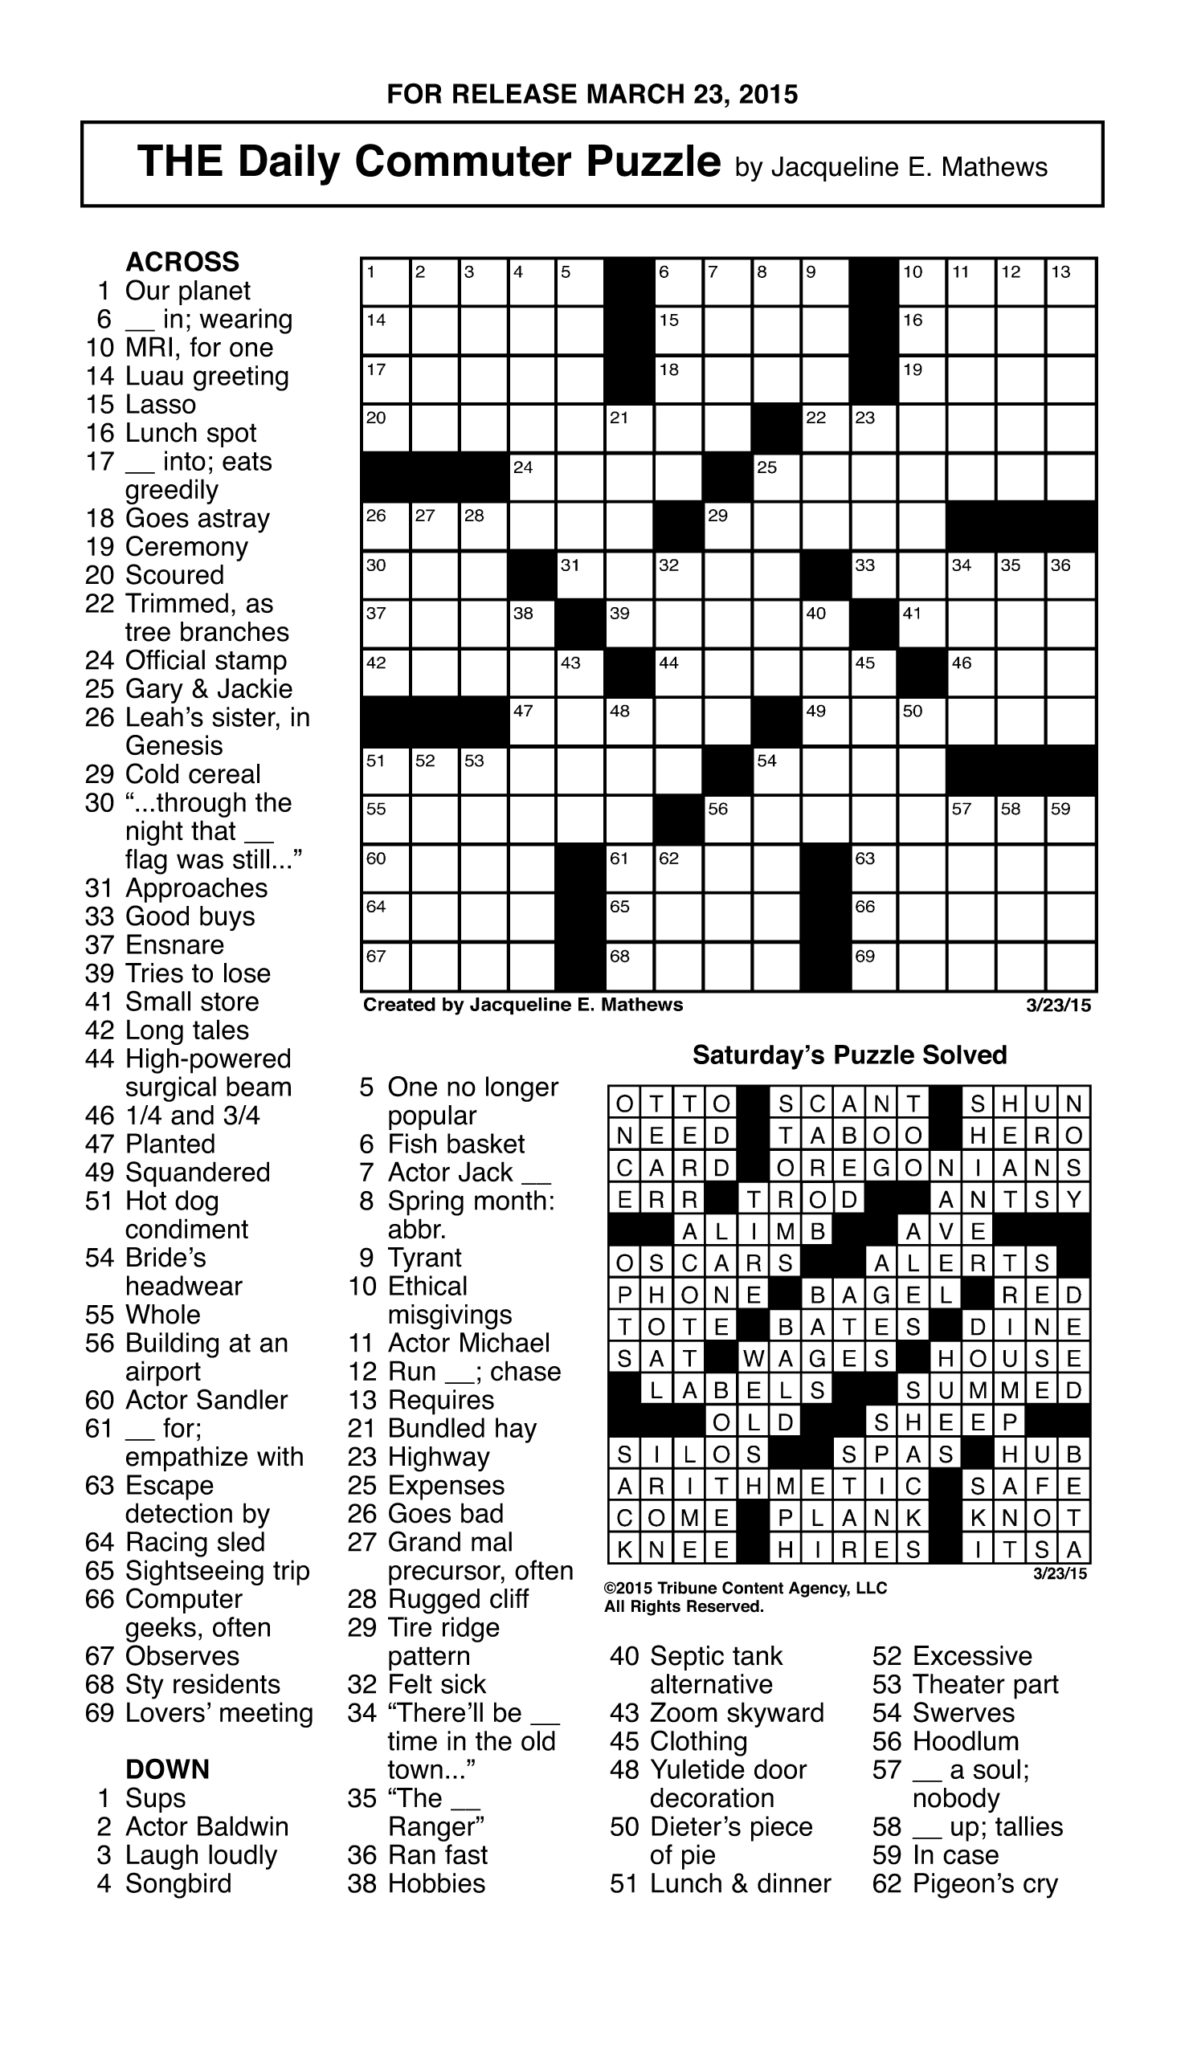 Sample Of THE Daily Commuter Puzzle Tribune Content Printable